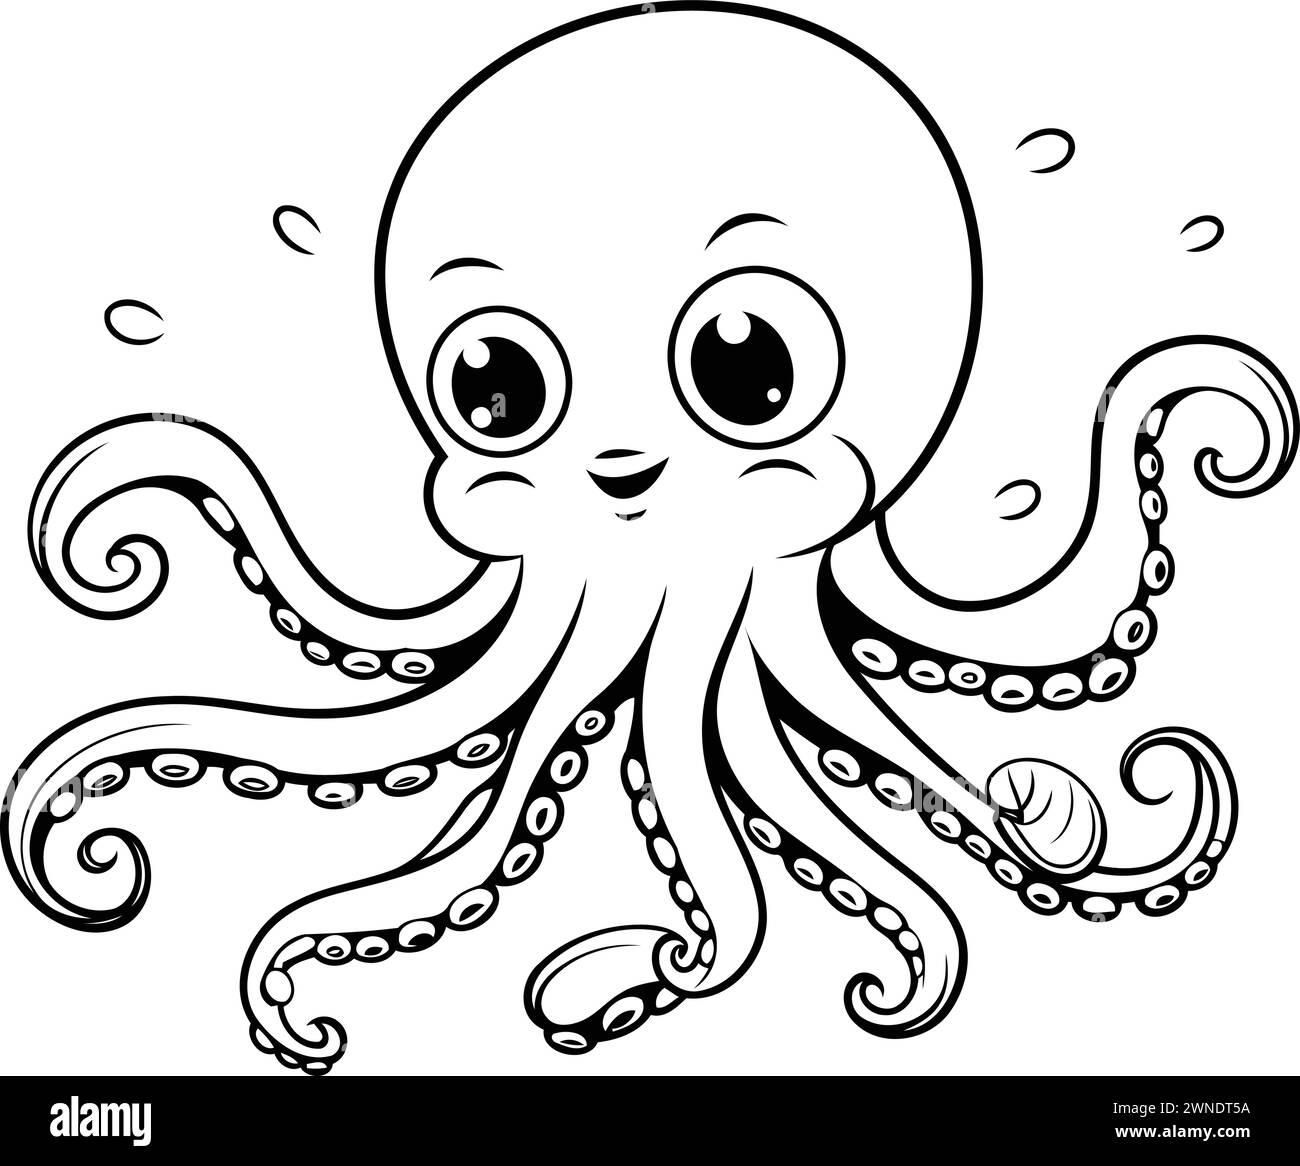 Coloring page of cute octopus. Black and white vector illustration. Stock Vector